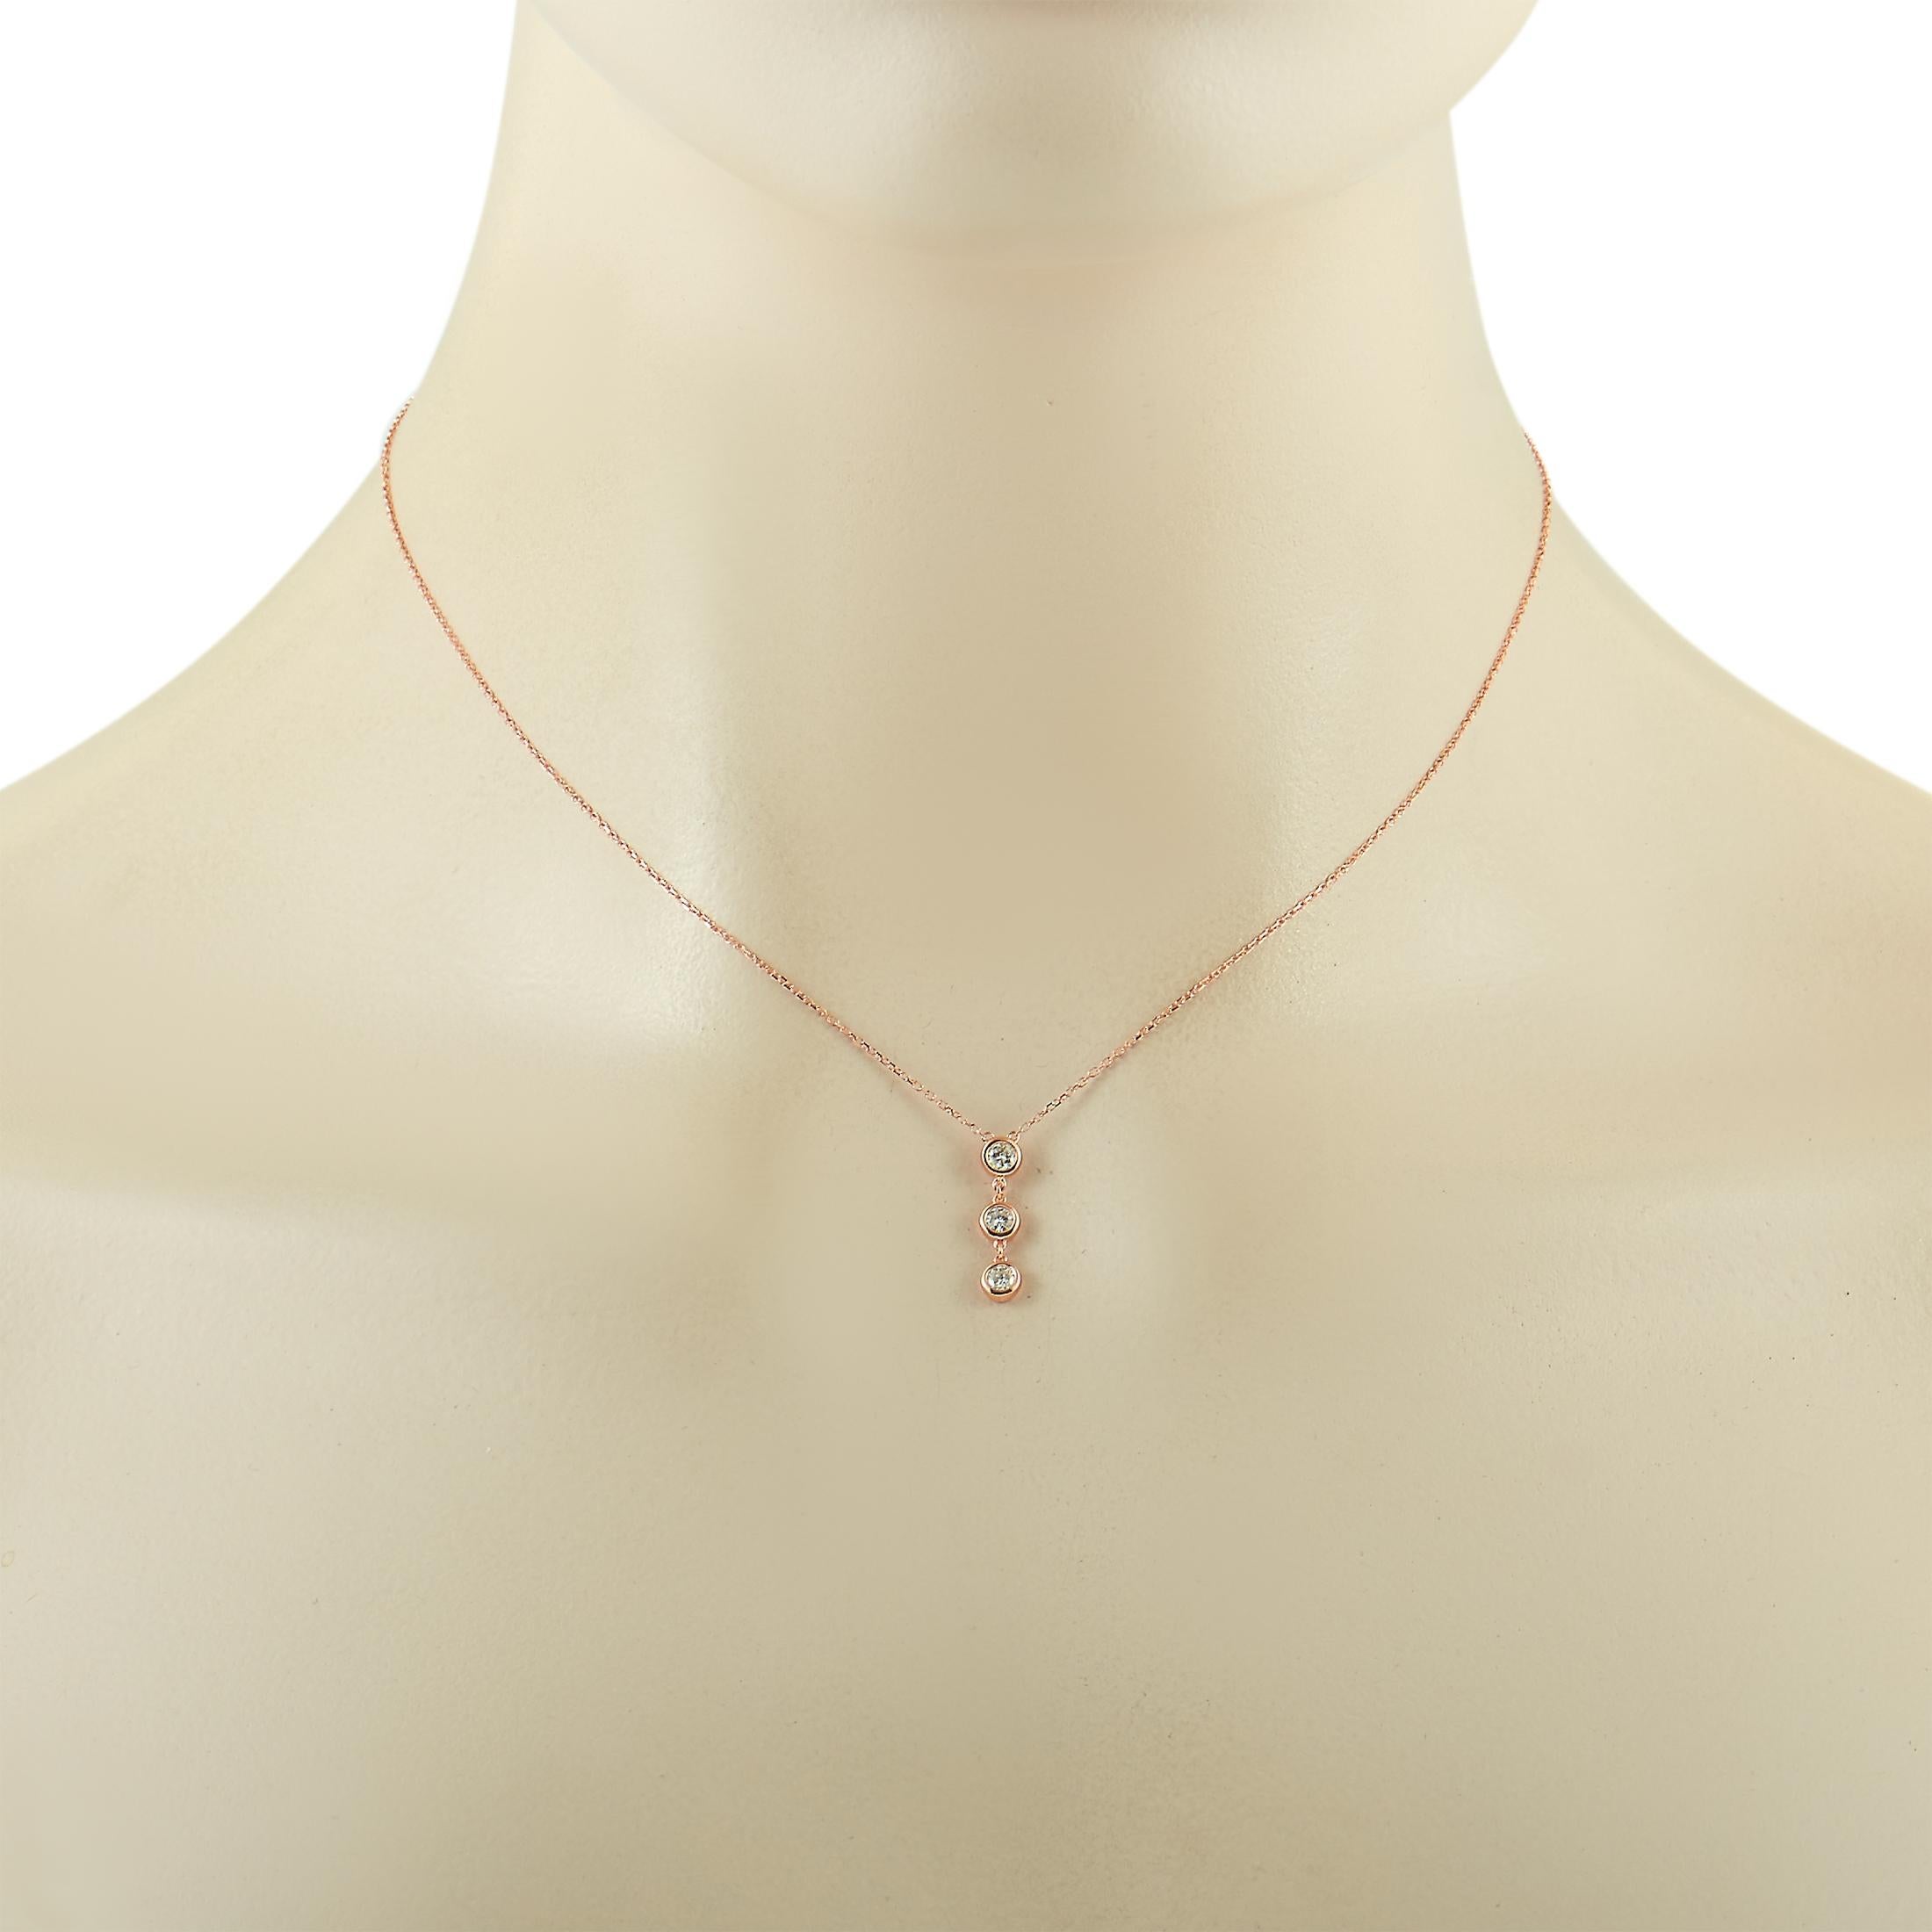 This LB Exclusive necklace is made of 14K rose gold and embellished with diamonds that amount to 0.25 carats. The necklace weighs 1.6 grams and boasts a 16” chain and a pendant that measures 0.60” in length and 0.12” in width.
 
 Offered in brand